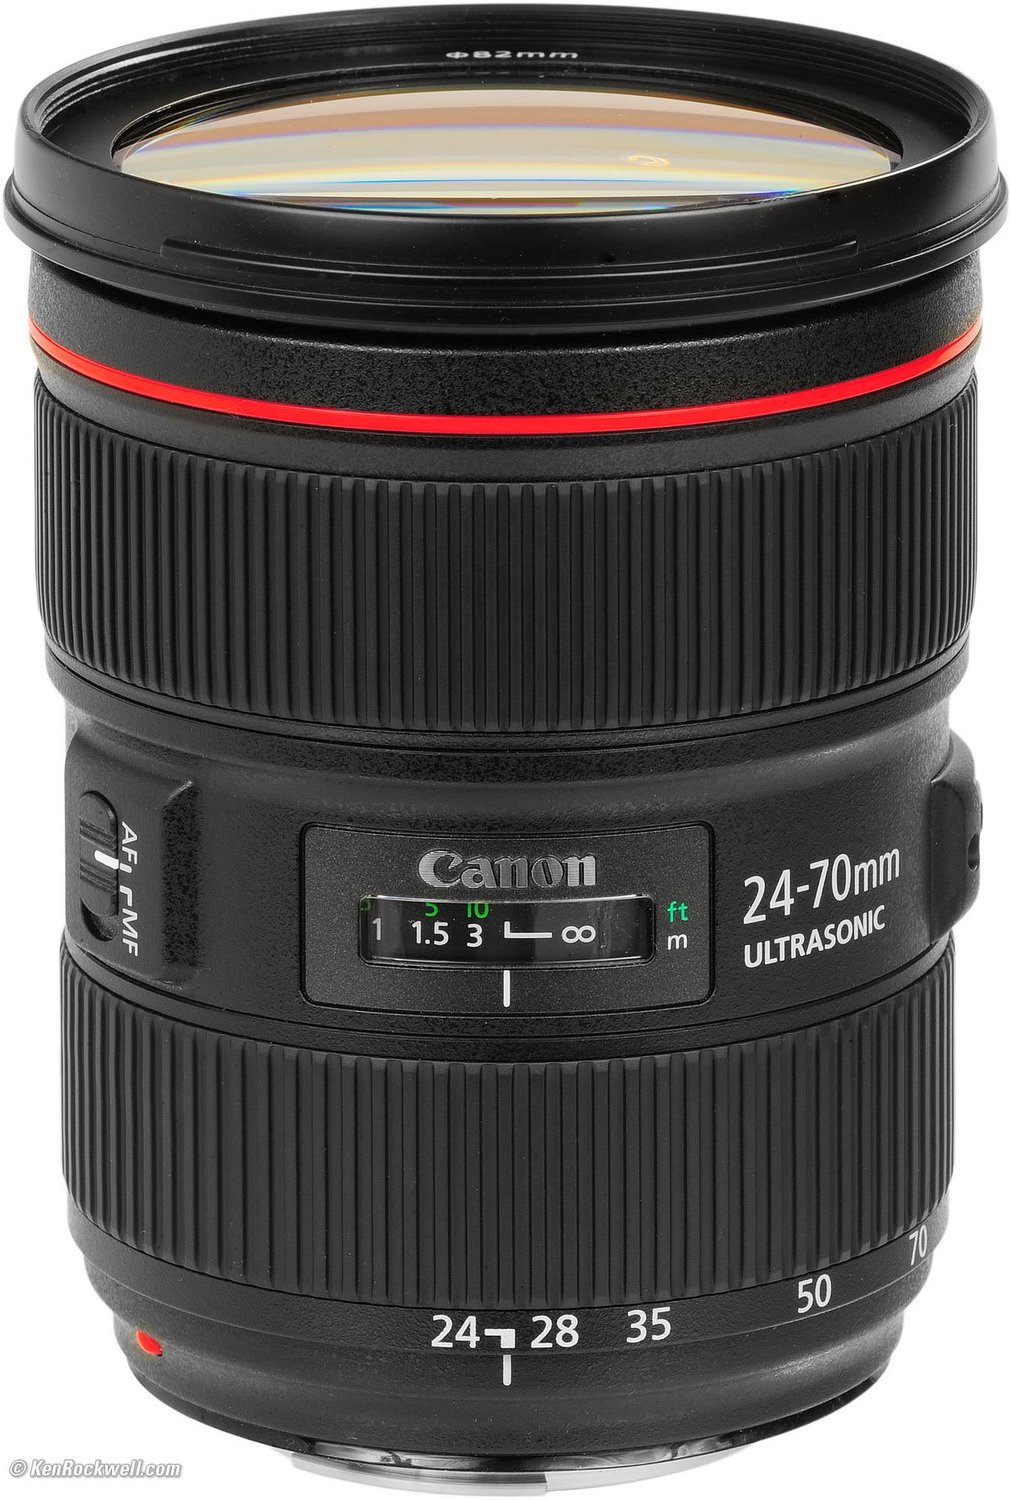 Canon 24-70mm f2.8 EF Zoom Lens